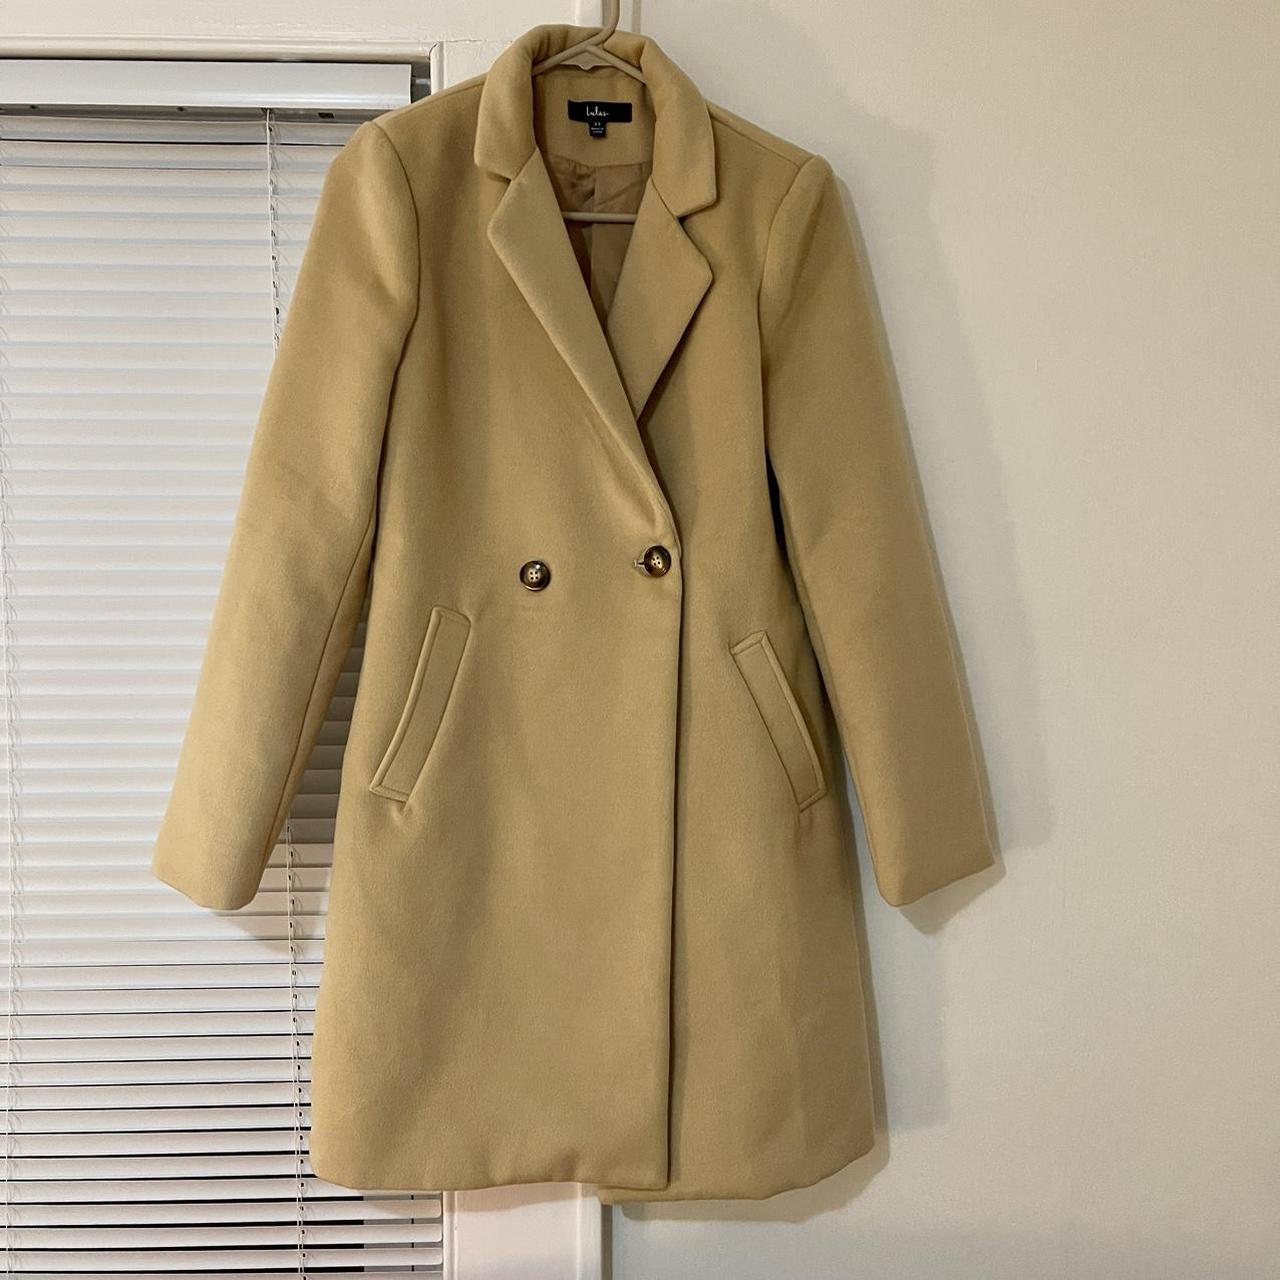 Tan Coat - Long Double-Breasted Coat - Double-Breasted Long Coat - Lulus